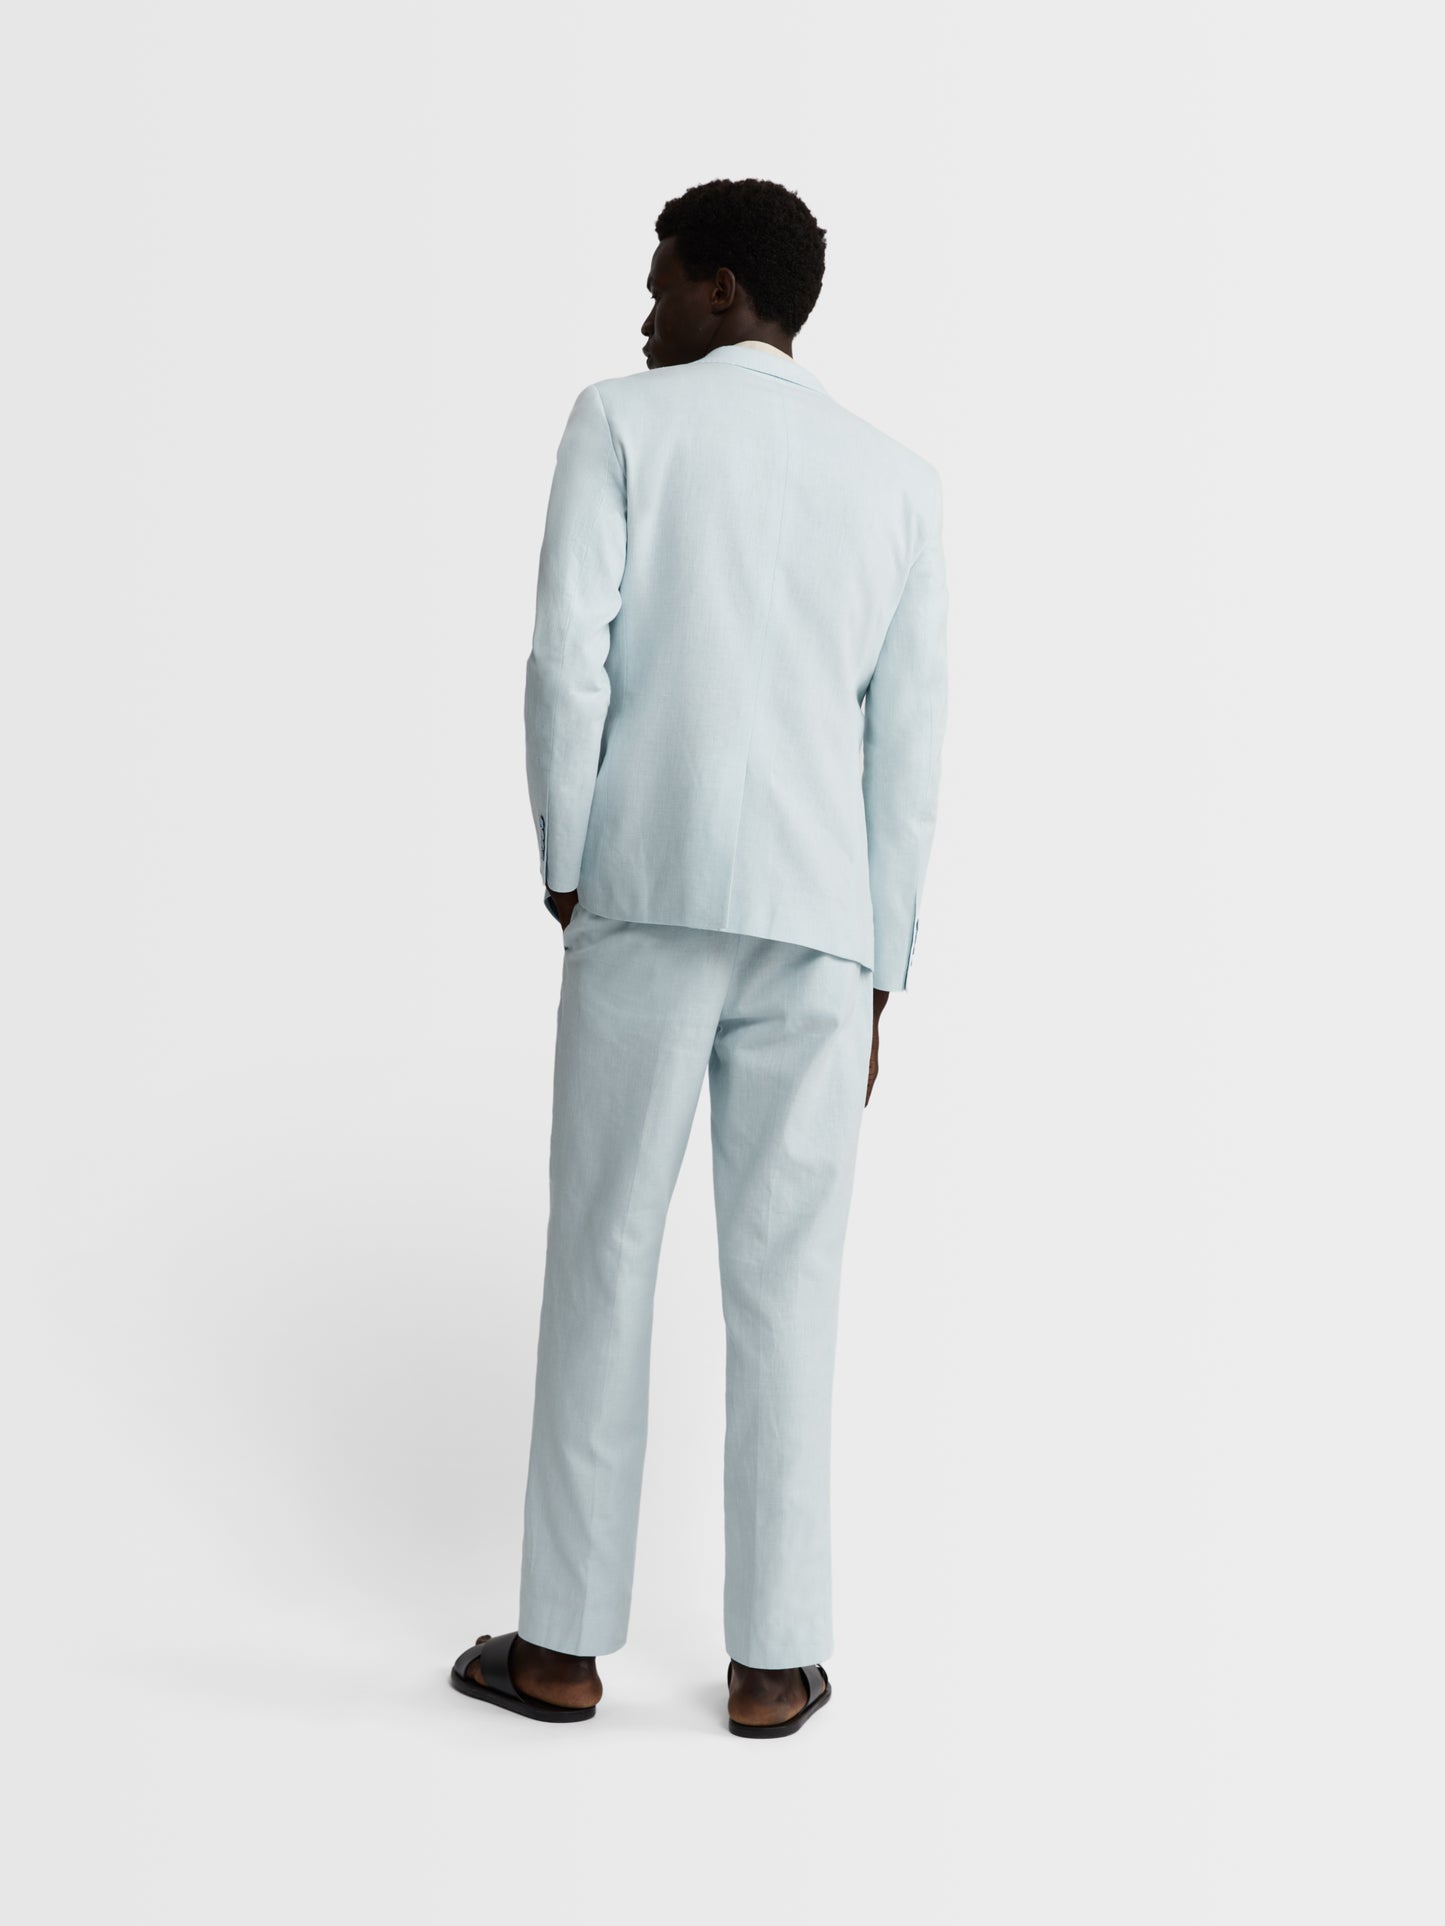 Image 6 of Slim Fit Single Breasted Linen Suit Jacket in Light Blue